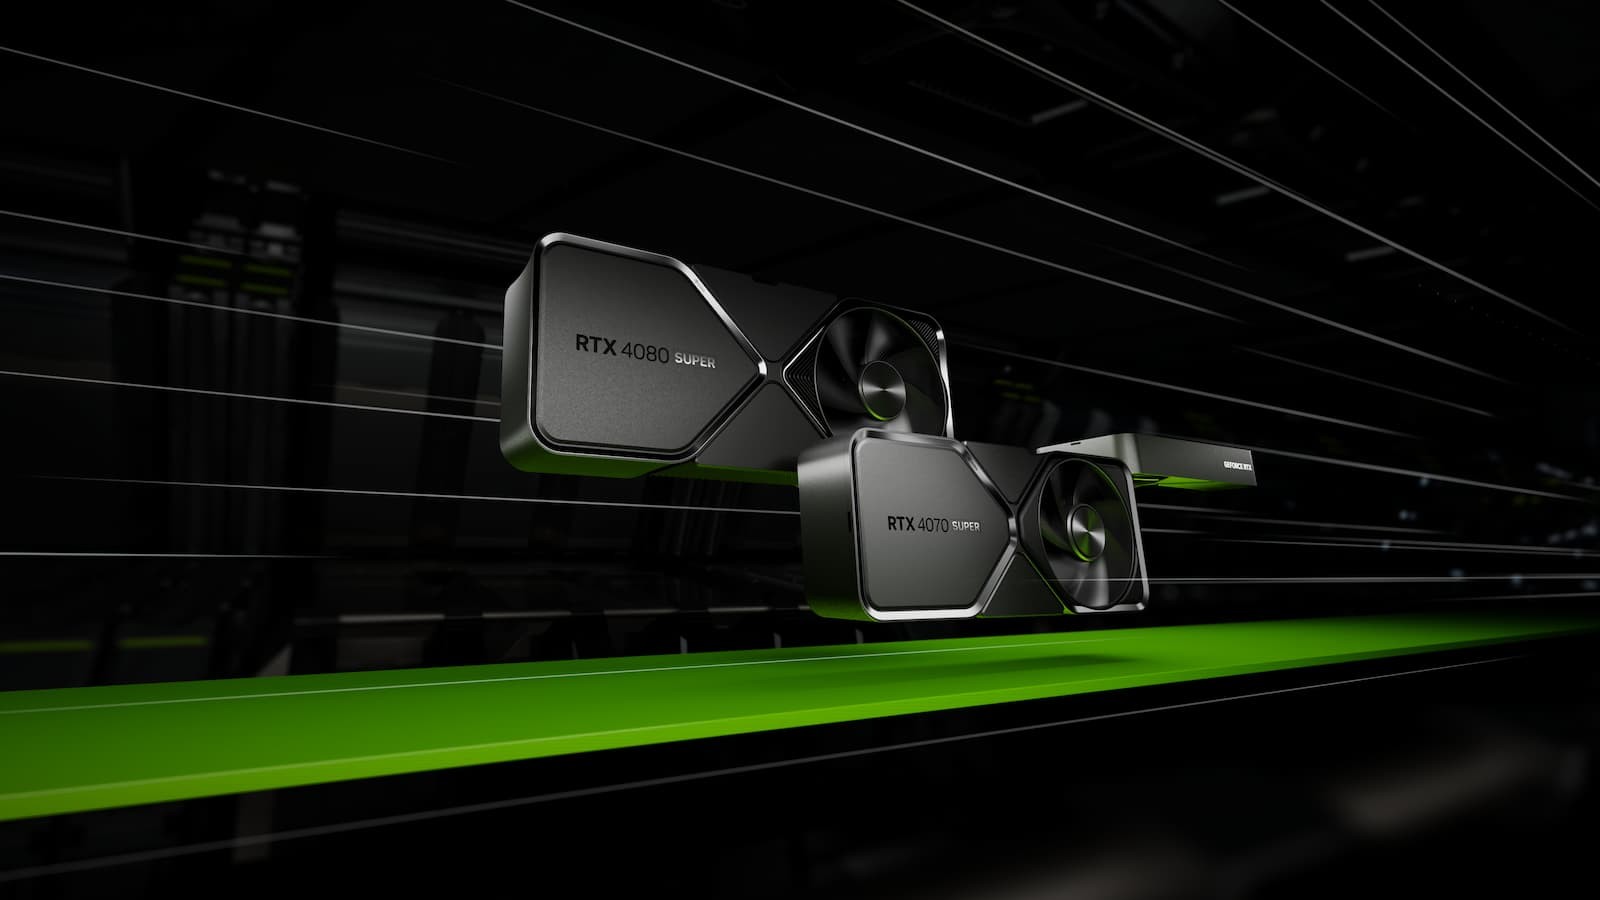 Modern graphics cards see minor, but still welcome improvements. Image credit: Nvidia